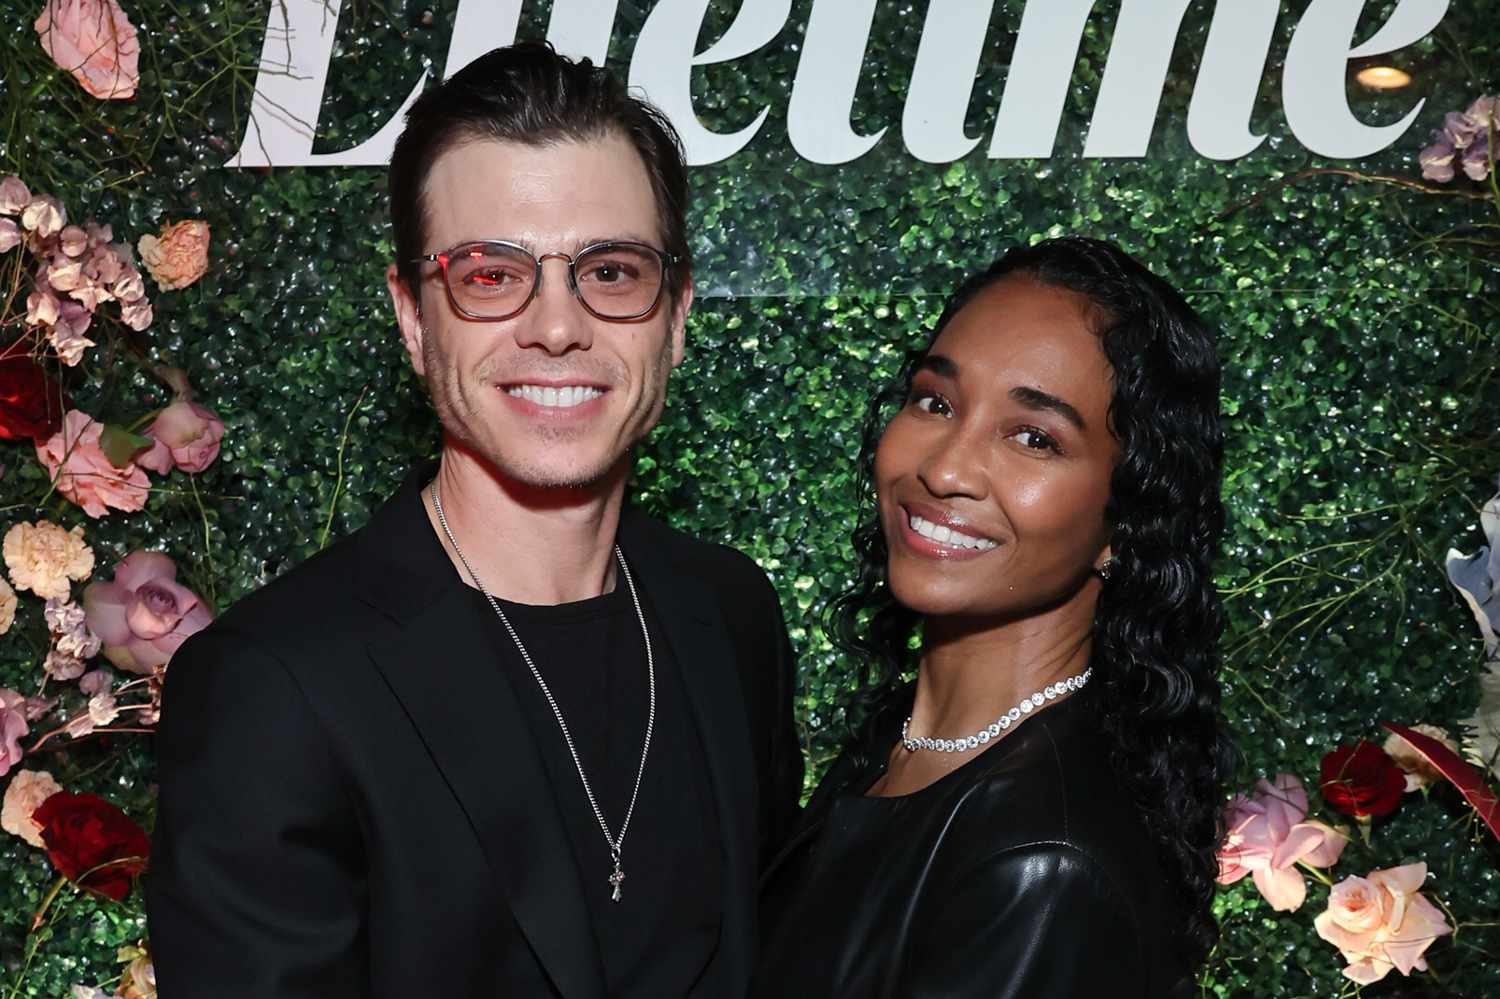 Chilli Says She No Longer Fears Marriage Thanks to Boyfriend Matthew Lawrence